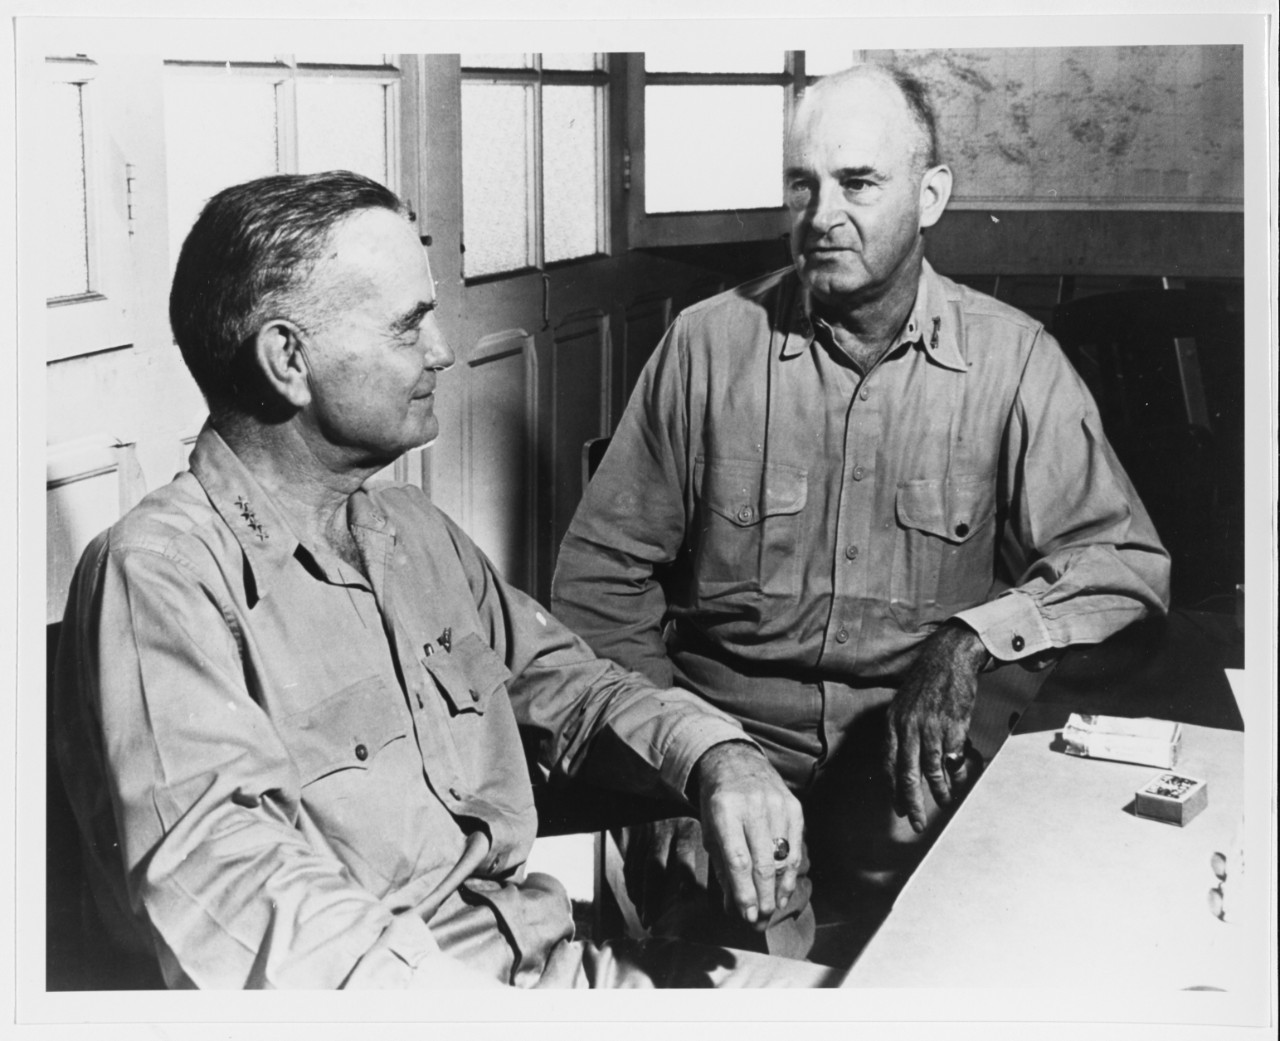 Photo #: NH 92759  Admiral William F. Halsey, USN  (left), Commander South Pacific Force